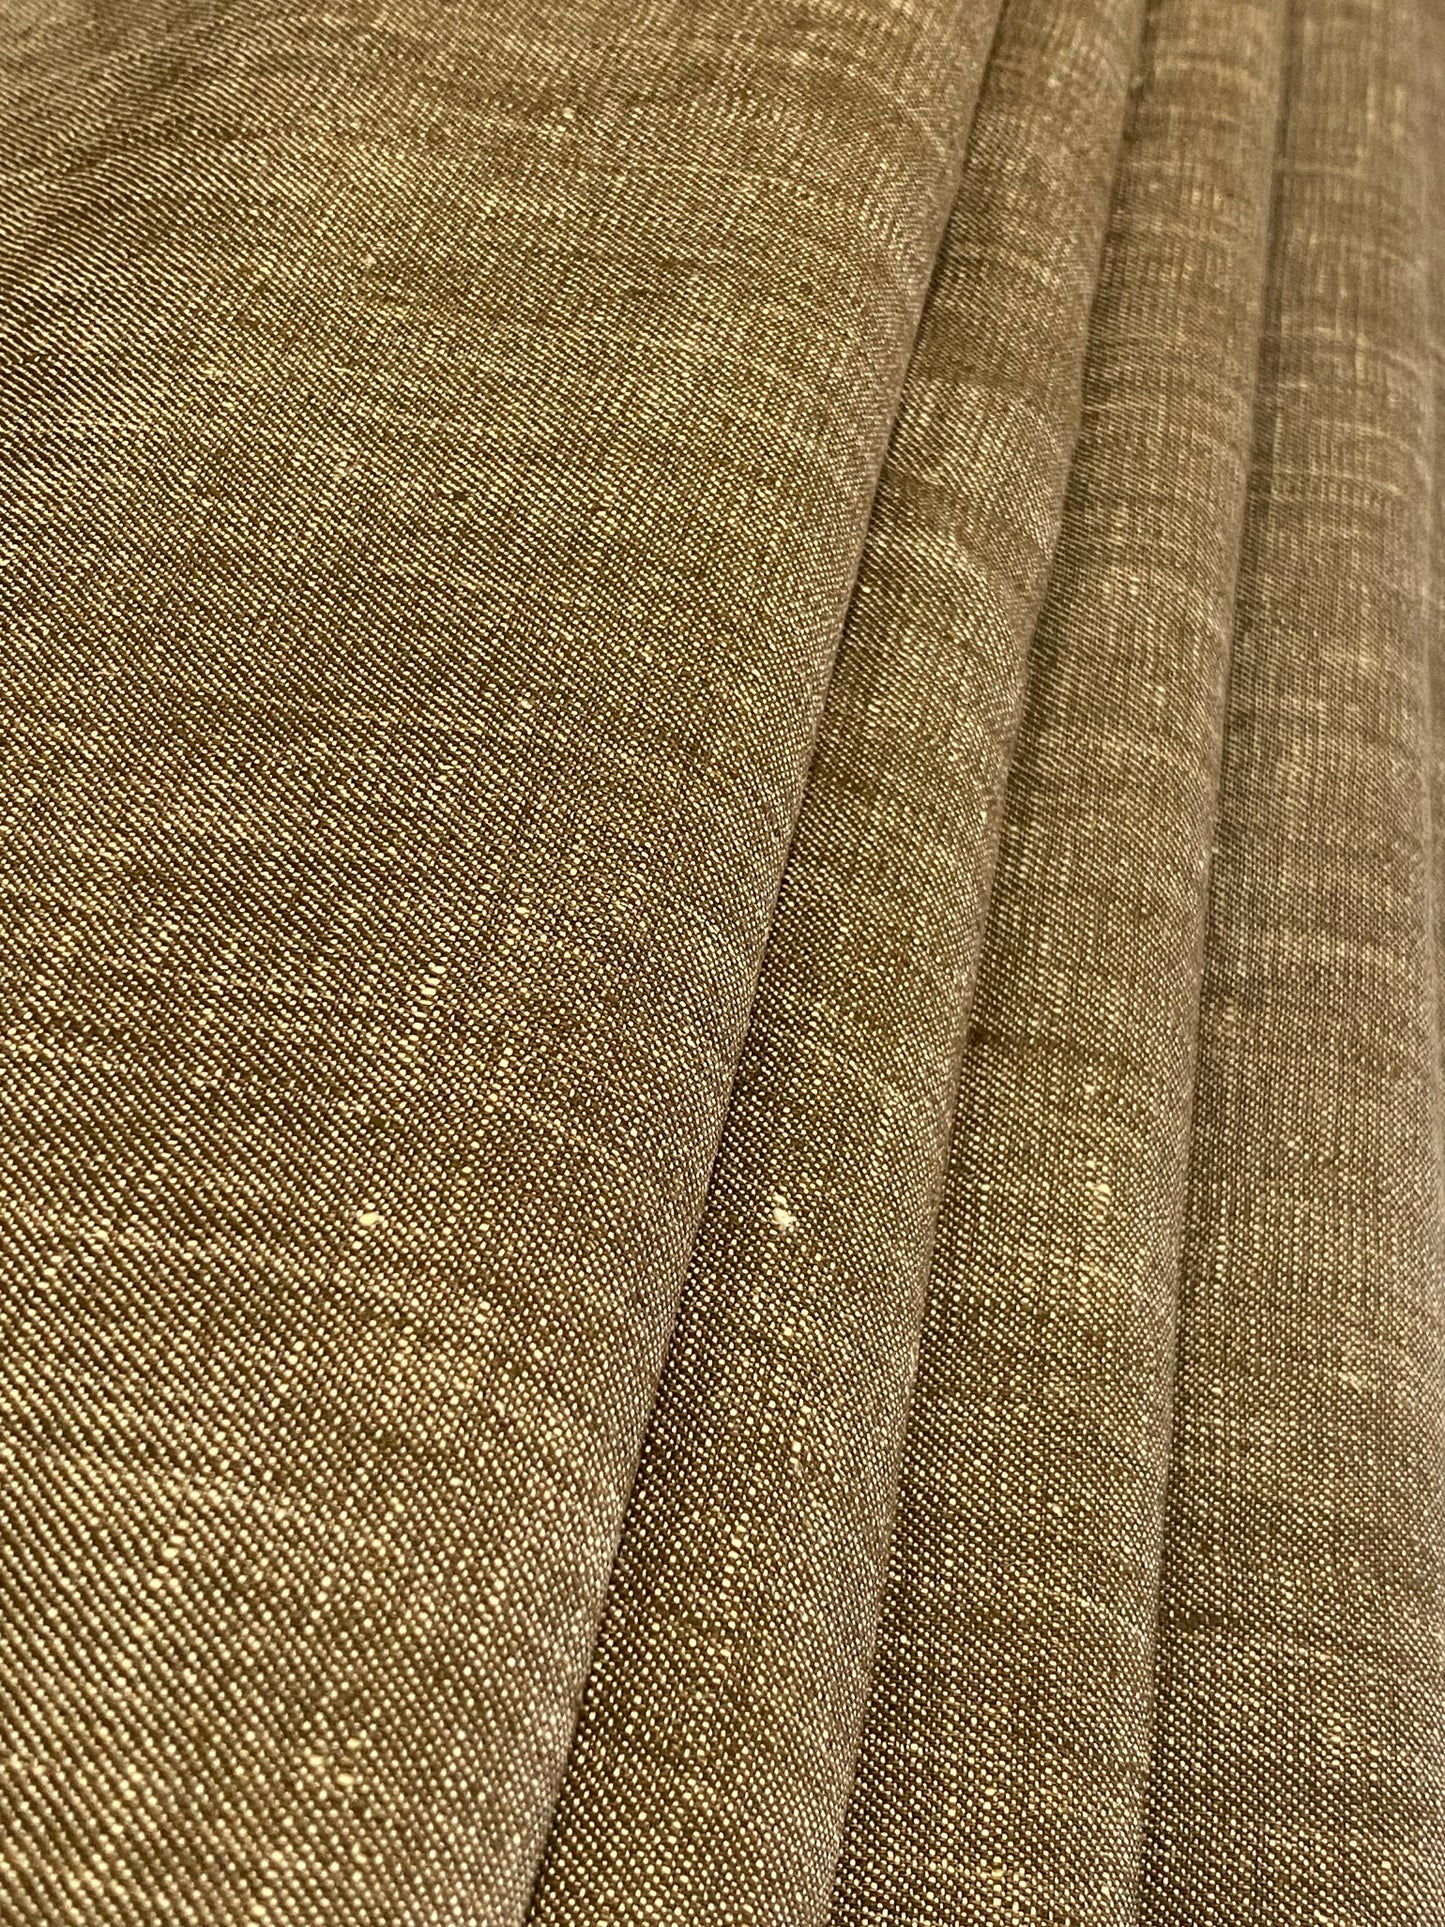 Gold-Dotted Yellow Linen Suiting- Premium Dyed Linen Fabric LL-043